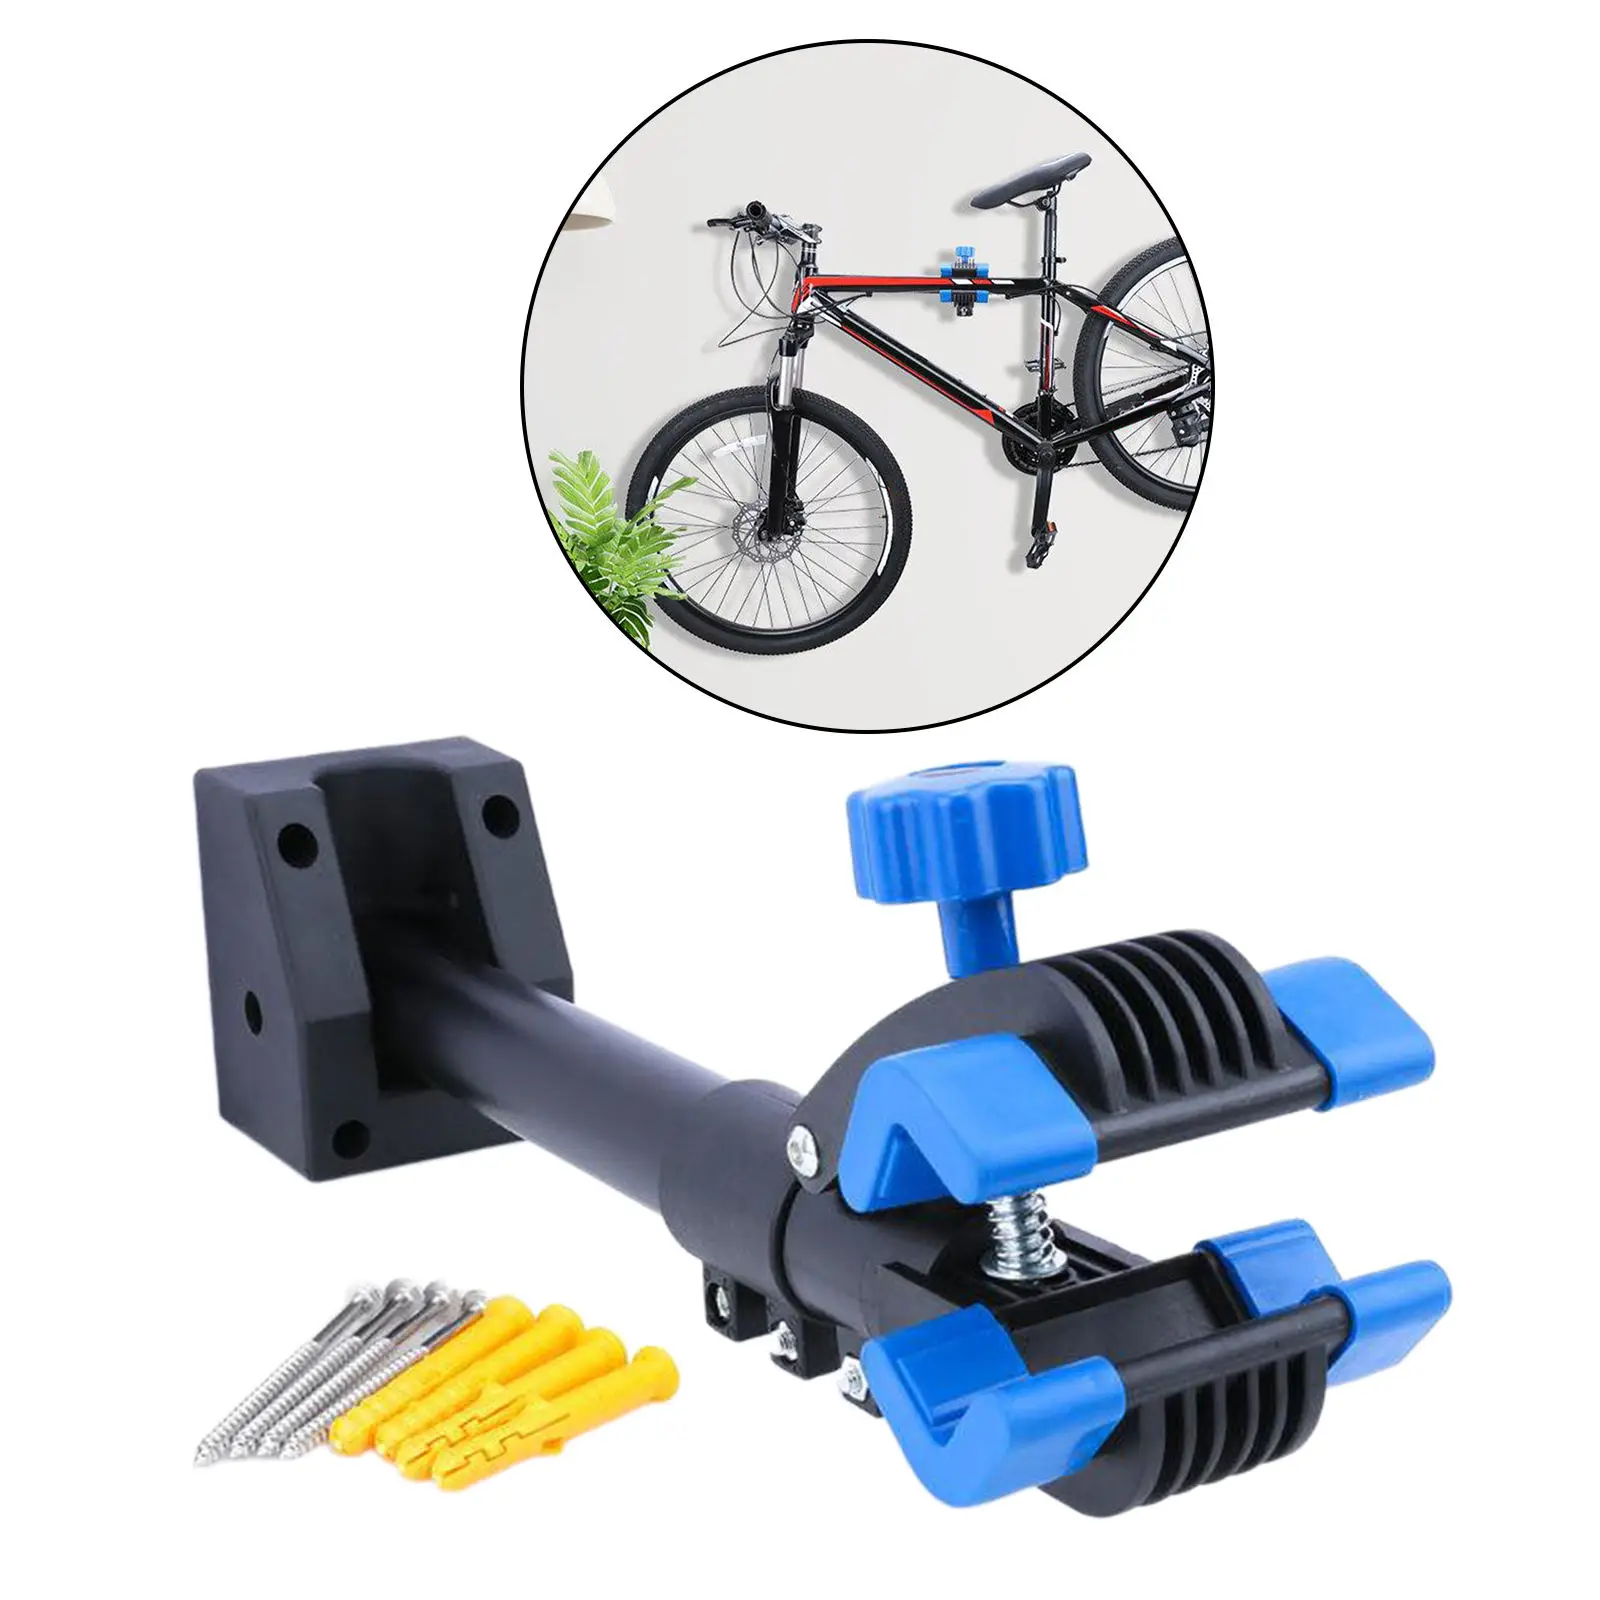 Adjustable Bicycle Wall Mount Rack Hanger Bike Repair Stand Maintenance Clamp Holder Garage Mechanic Workstand with Clamp